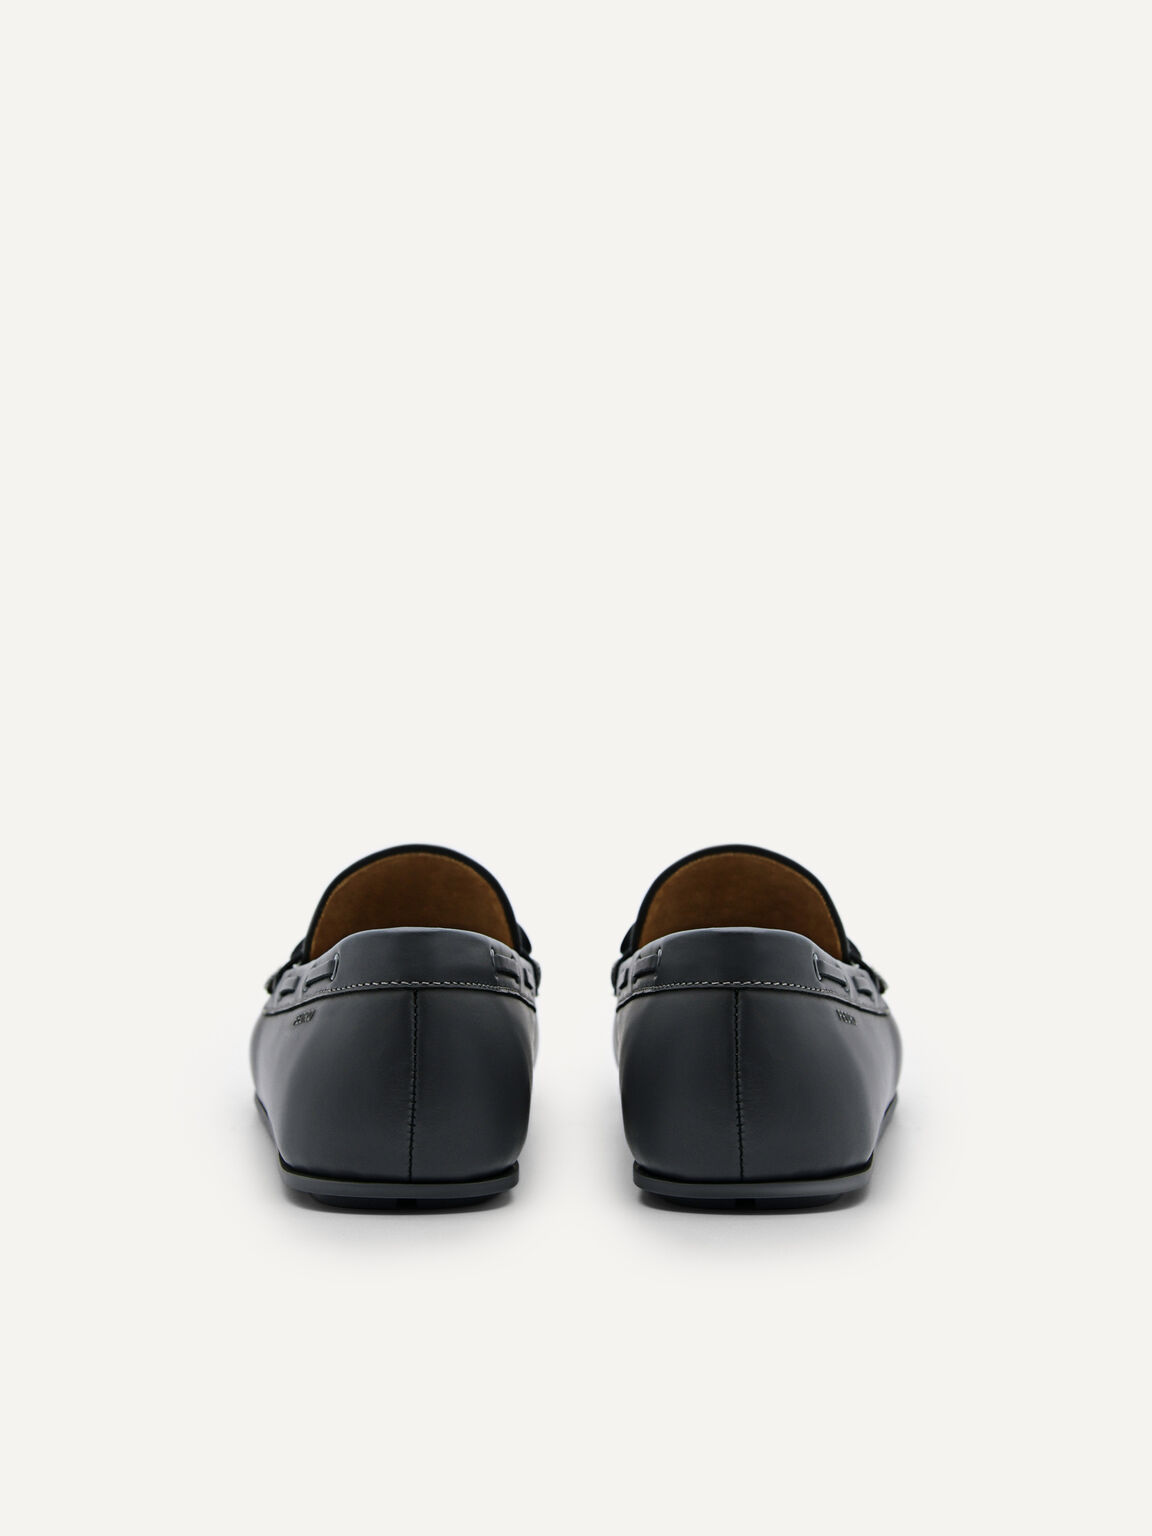 Leather Bow Driving Shoes, Dark Grey